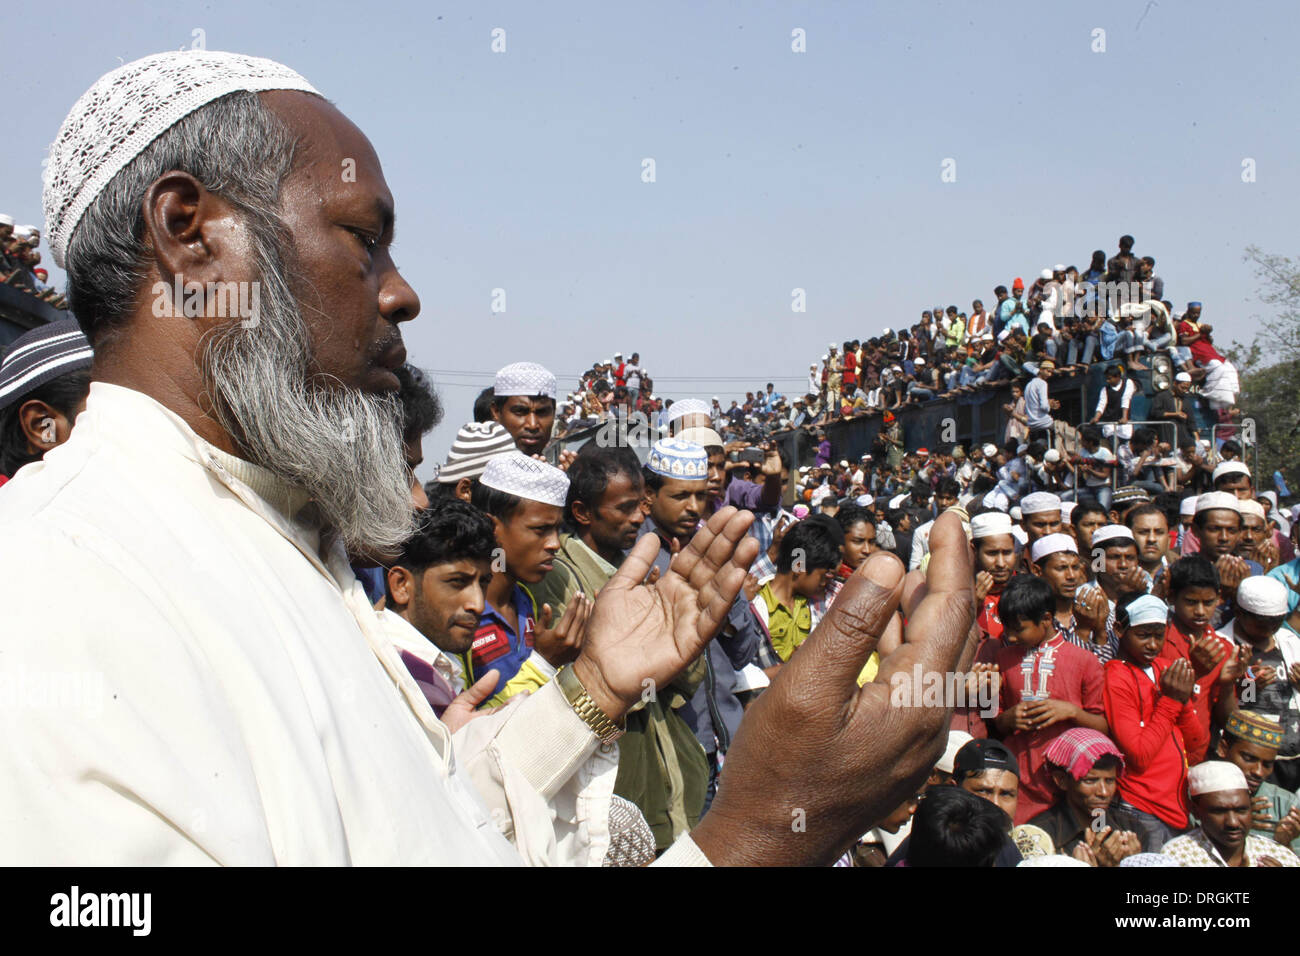 Dhaka,Bangladesh. 26th Jan, 2014. Bangladeshi Muslim devotees attend the Akheri Munajat concluding prayers on the third day of Biswa Ijtema, the second largest Muslim congregation after the Hajj, at Tongi with more than two million Muslims from Bangladesh and abroad. The Biswa Ijtema, the world’s second largest religious gathering of Muslims concluded with the prayer of Akheri Munajat on the bank of river Turag. The event focuses on prayers and meditation and does not allow political discussion.  Thousands of Muslims joined the prayer at the Biswa Ijtema grounds and surrounding areas. Stock Photo